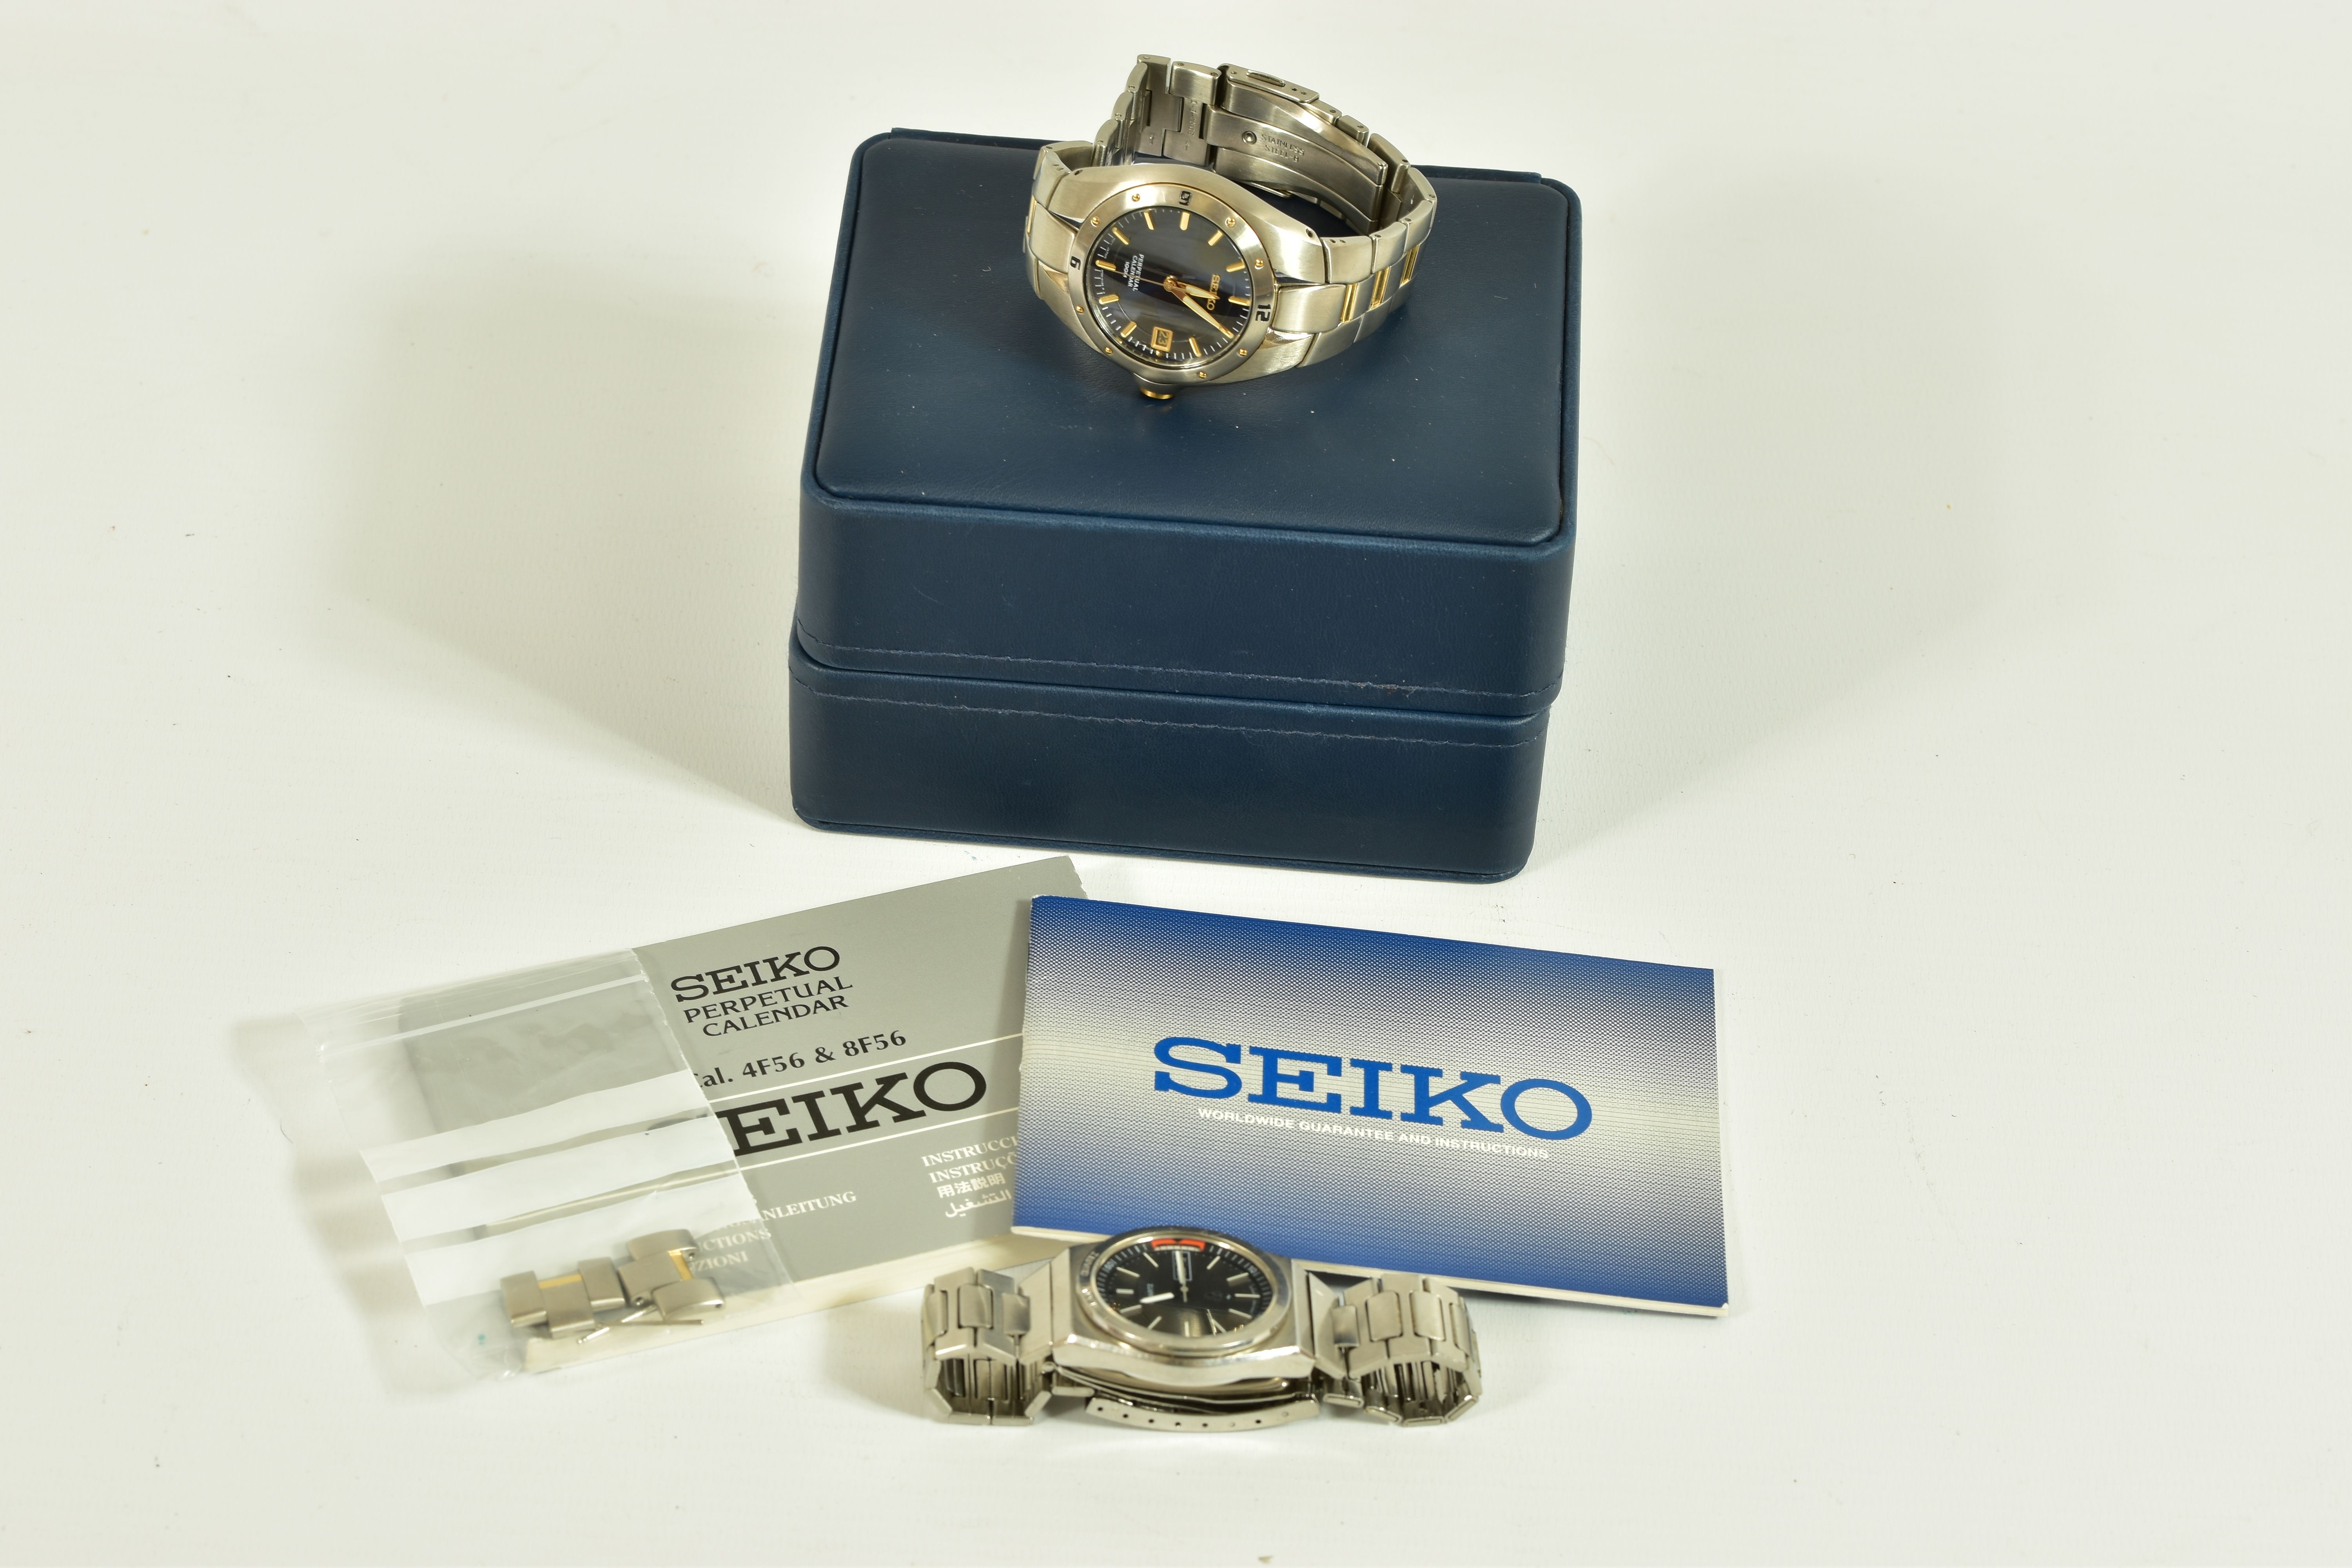 TWO SEIKO WRISTWATCHES, the first a Seiko perpetual calendar watch, dark blue dial with gold - Image 6 of 6